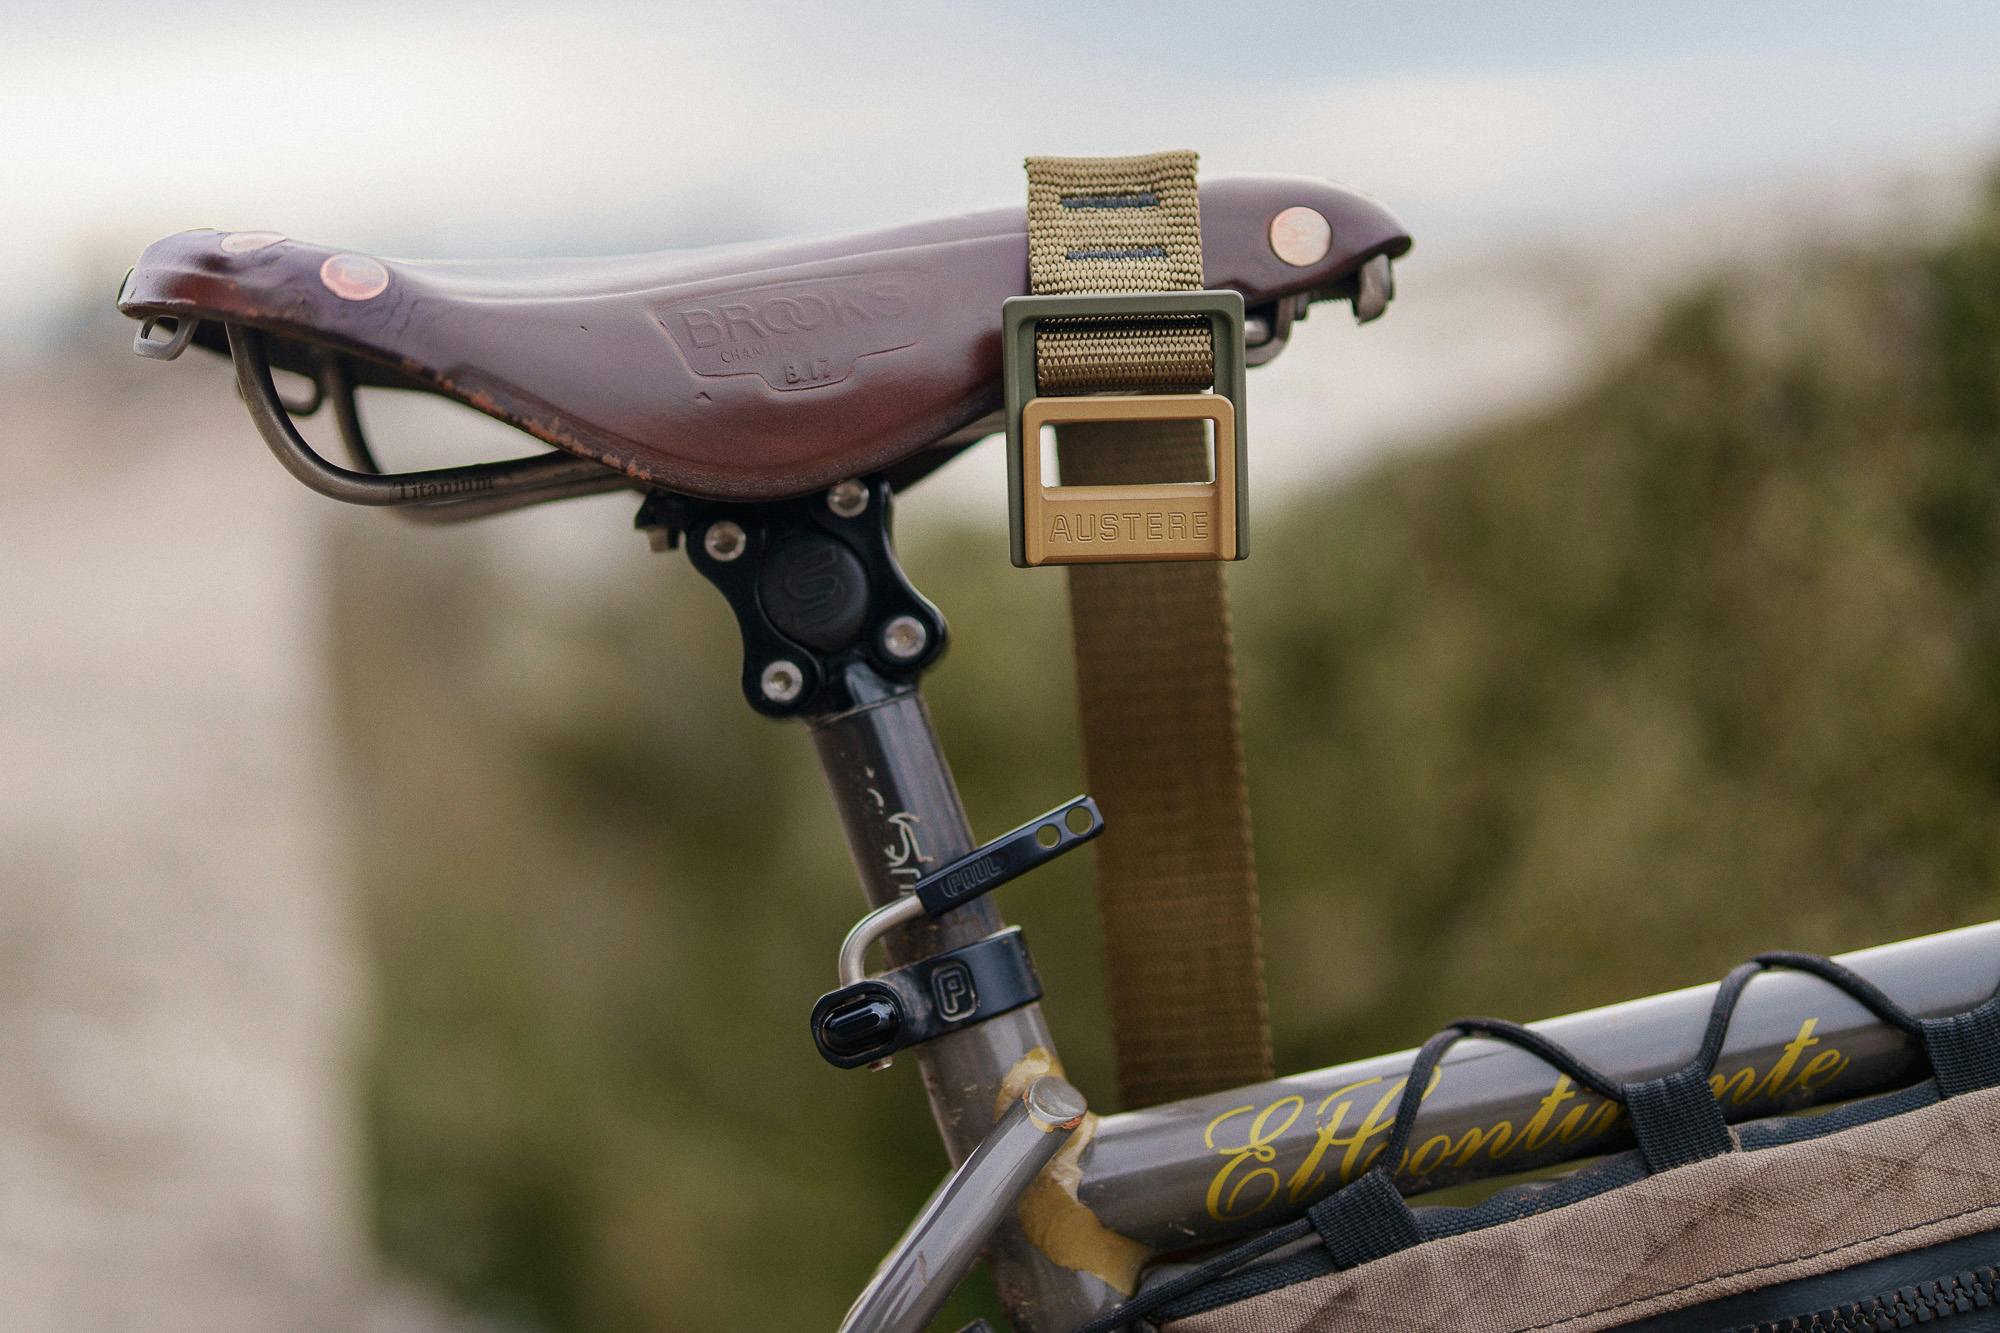 An Austere Lock Belt hangs from a Brooks saddle.